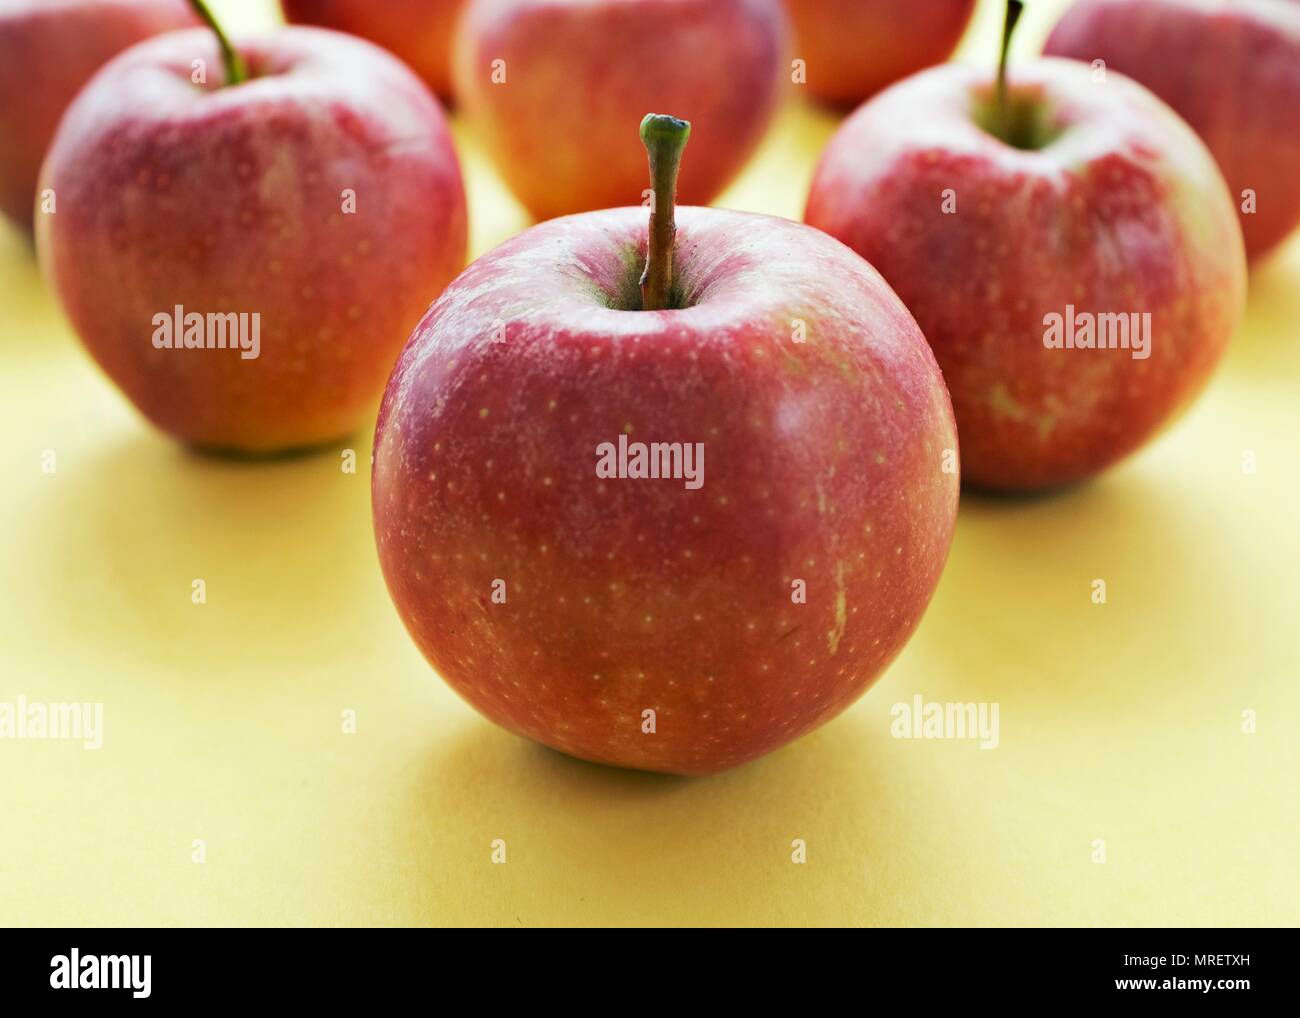 Red apples, close up. Stock Photo